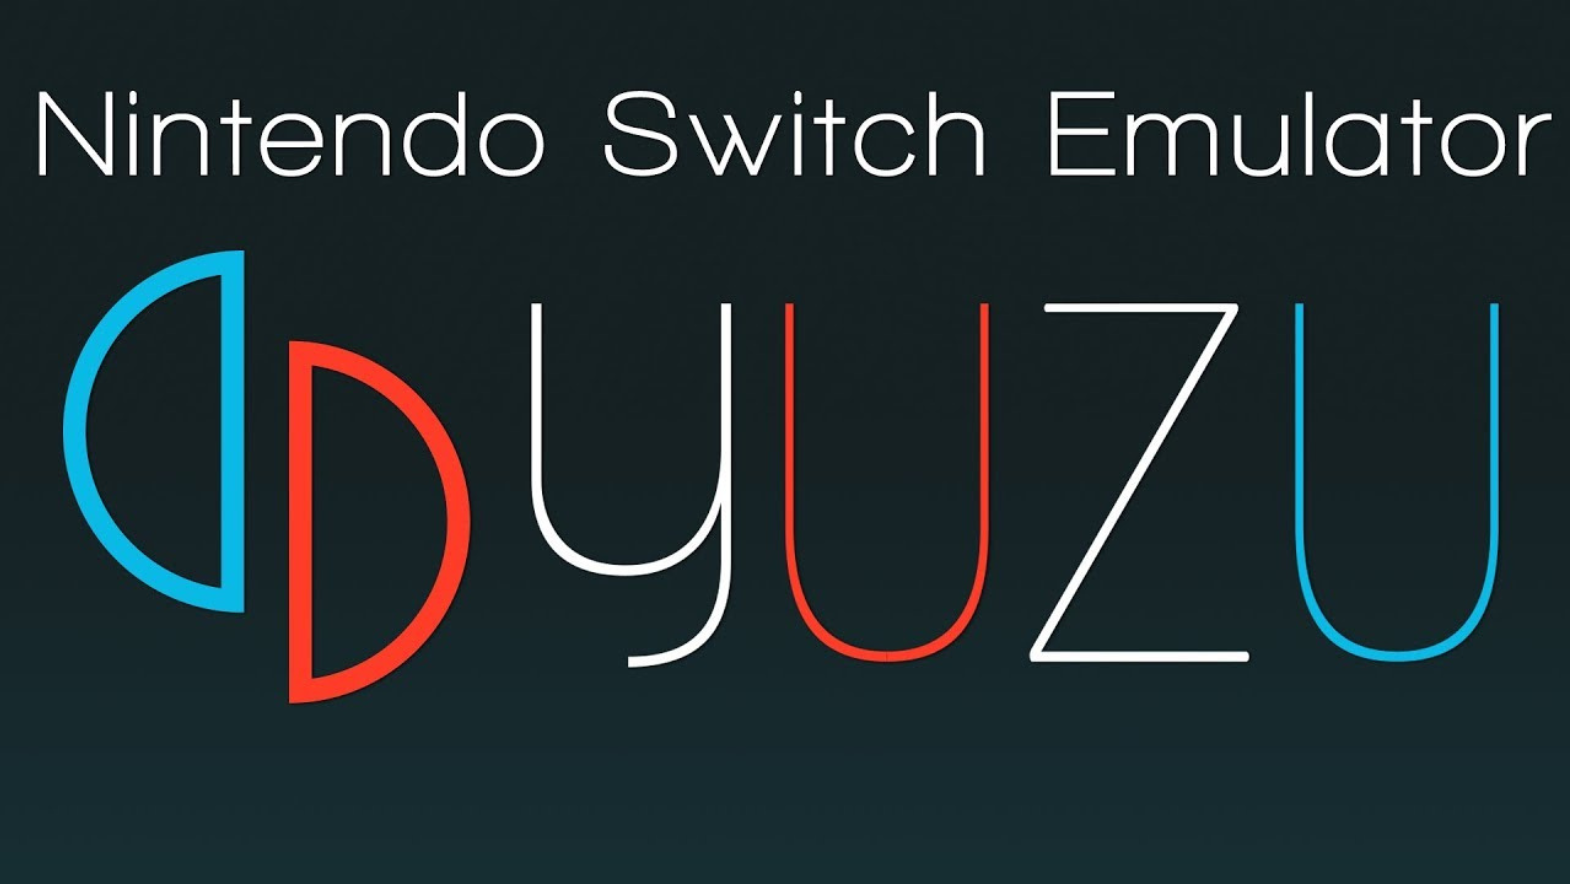 YUZU, the Nintendo Switch emulator now available on Android